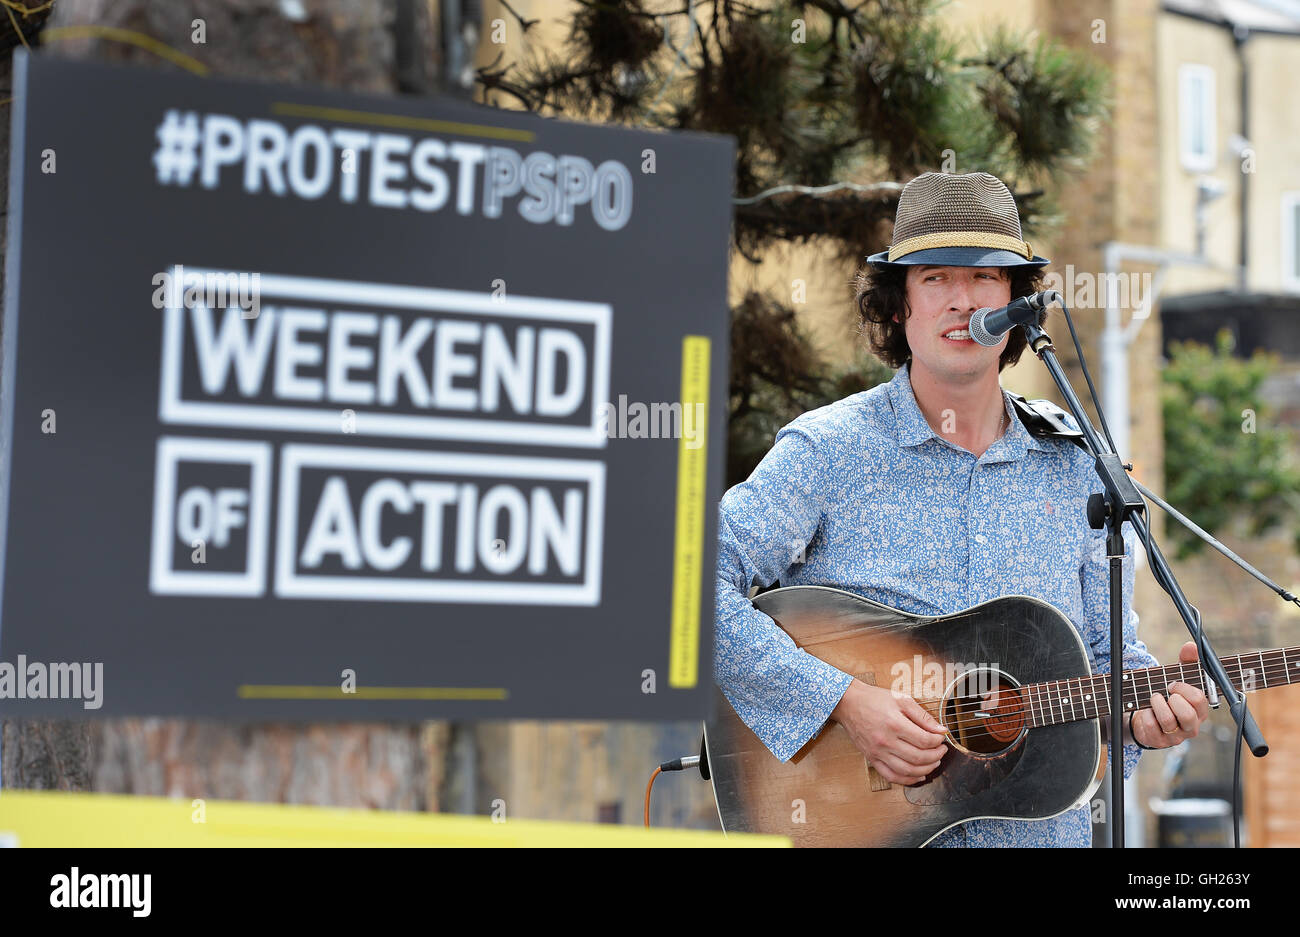 Jonny Walker sings during a protest against new local council Public Space Protection Orders (PSPO), in Gillett Square Dalston, London. Stock Photo